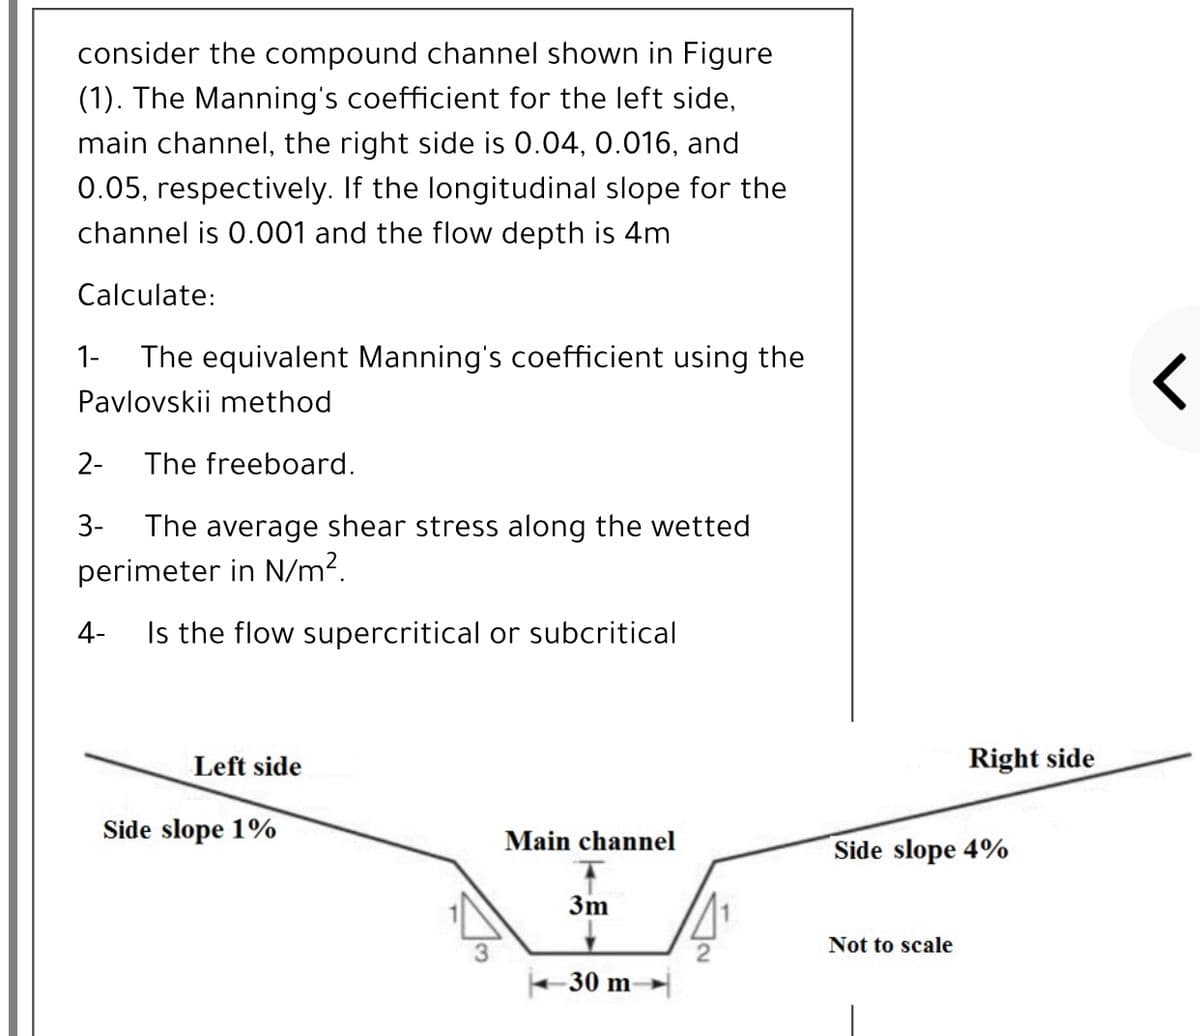 consider the compound channel shown in Figure
(1). The Manning's coefficient for the left side,
main channel, the right side is 0.04, 0.016, and
0.05, respectively. If the longitudinal slope for the
channel is 0.001 and the flow depth is 4m
Calculate:
1-
The equivalent Manning's coefficient using the
Pavlovskii method
2-
The freeboard.
The average shear stress along the wetted
perimeter in N/m?.
3-
4-
Is the flow supercritical or subcritical
Left side
Right side
Side slope 1%
Main channel
Side slope 4%
3m
Not to scale
-30 m
